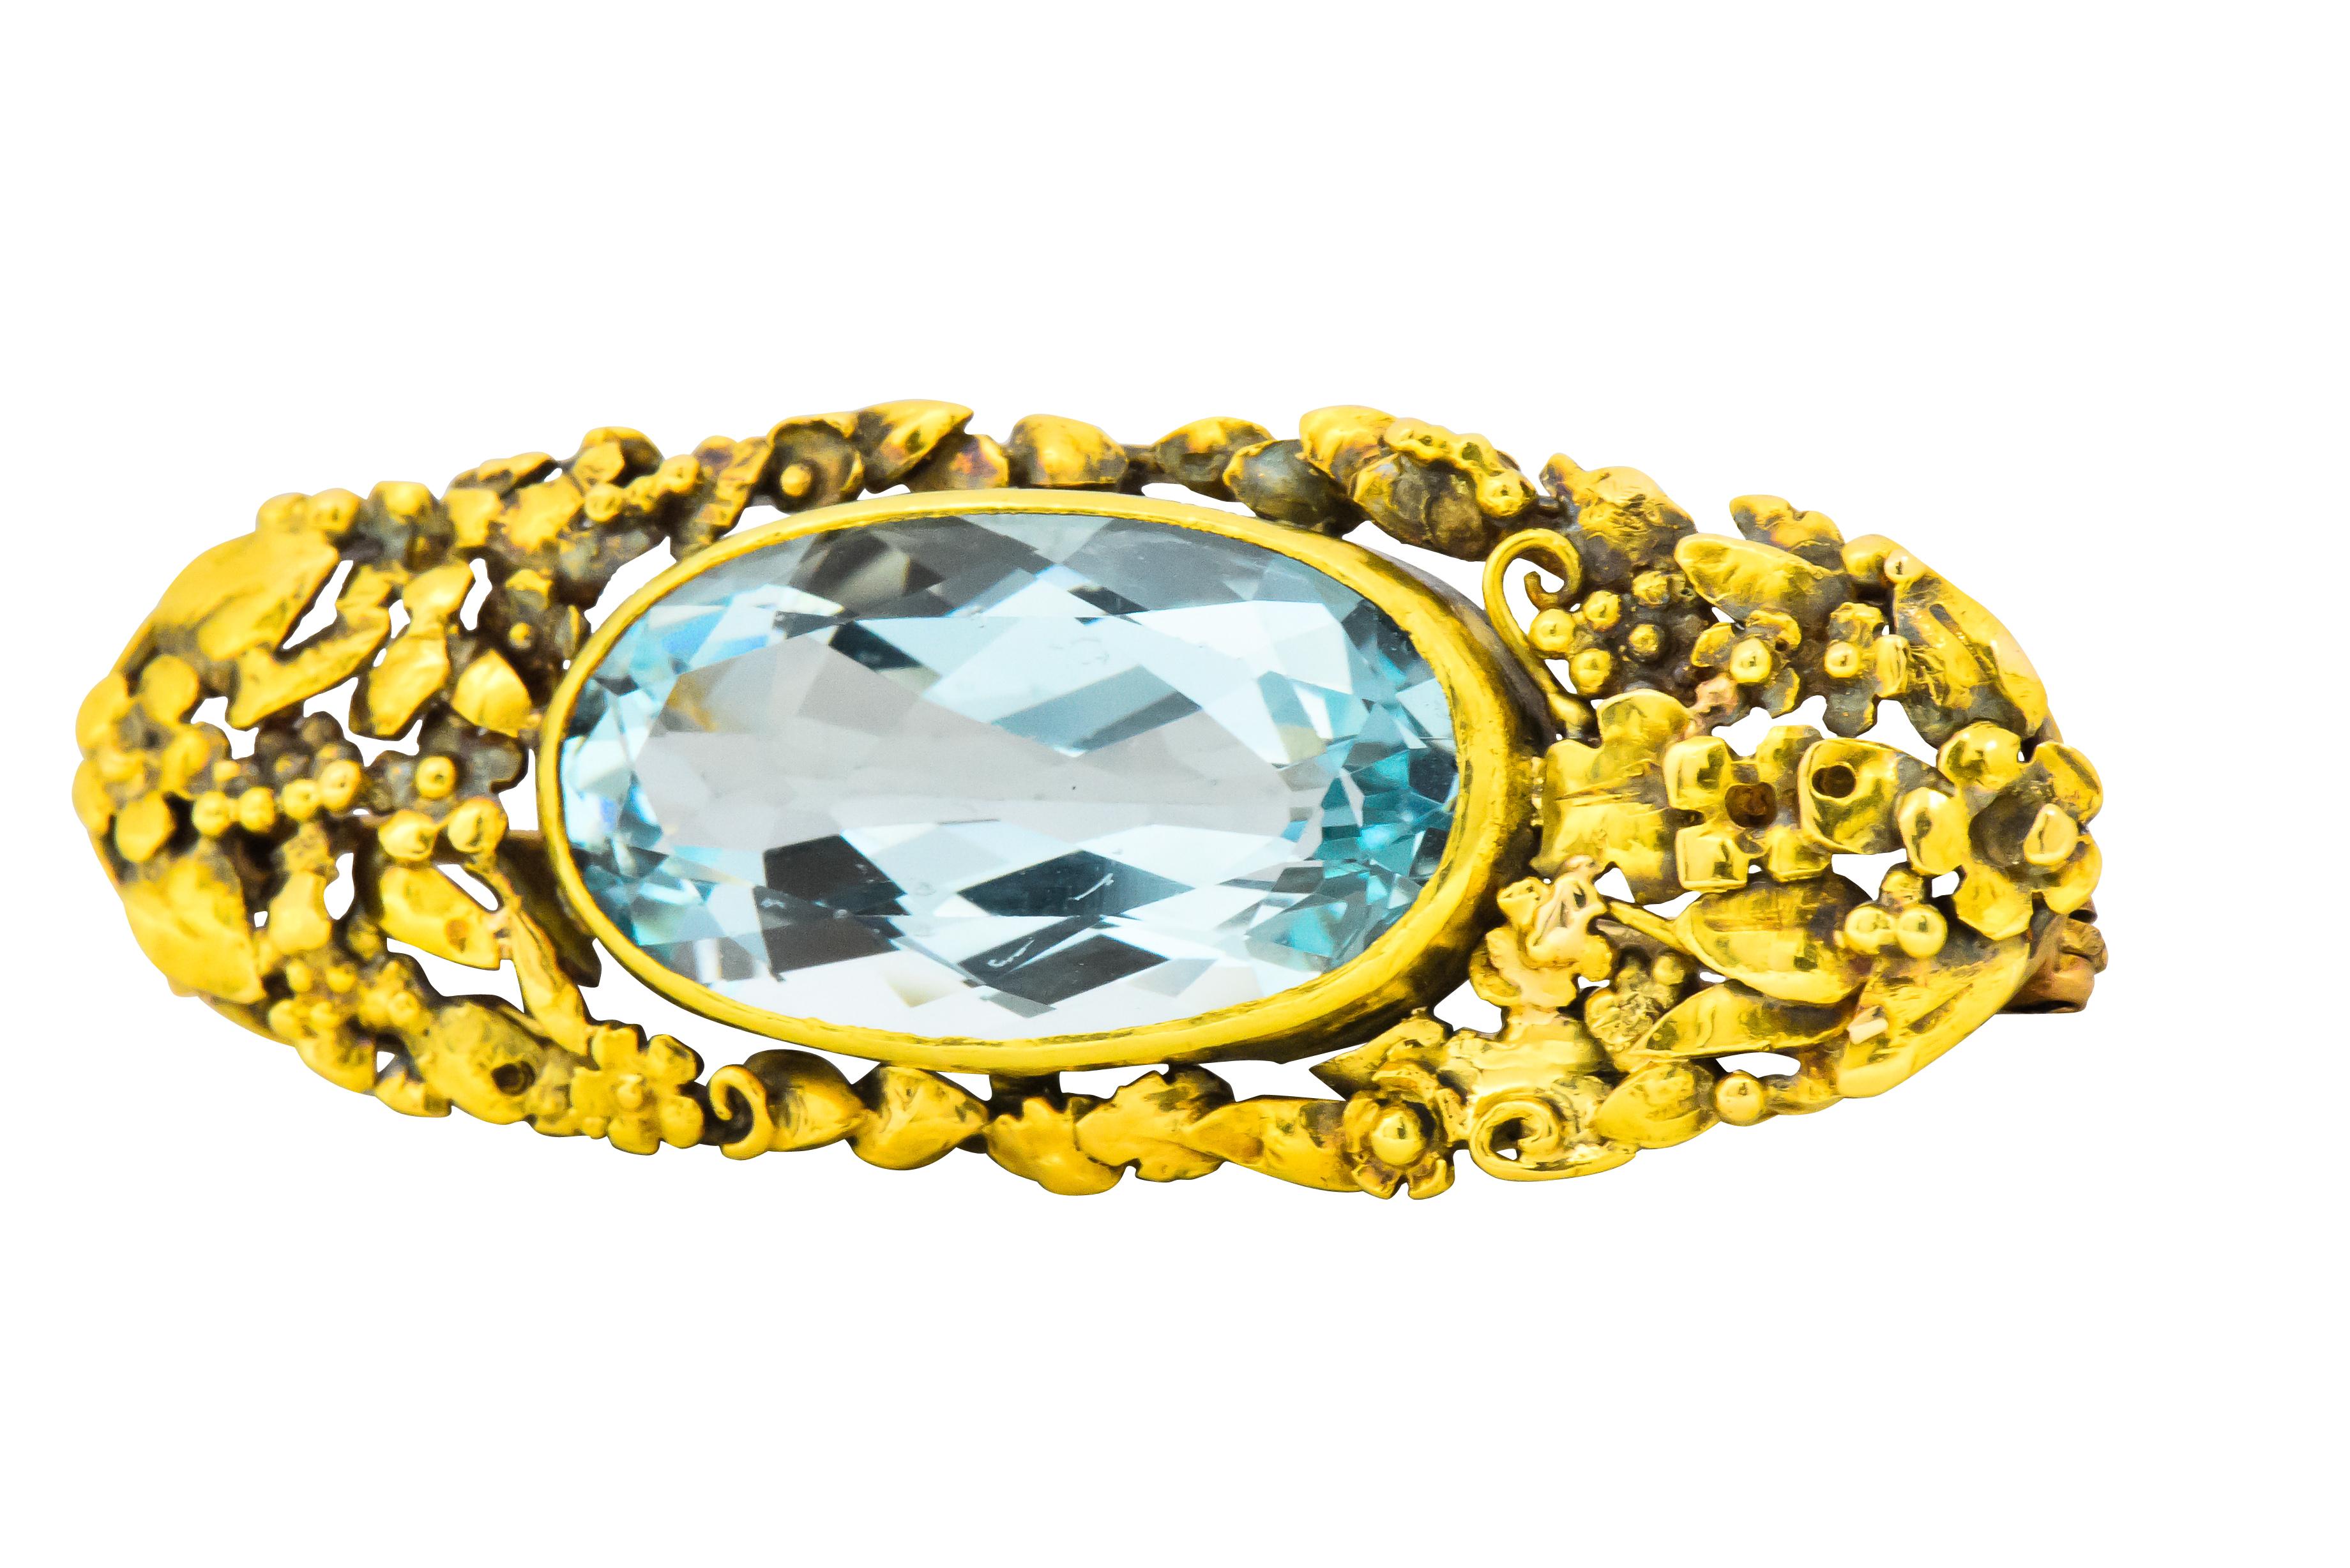 Centering an oval aquamarine weighing approximately 12.55 carats, very very slightly greenish blue 

Bezel set east to west

Highly detailed openwork foliate motif setting with leaves, flowers, and grapes

Tested as 14 karat gold

Circa